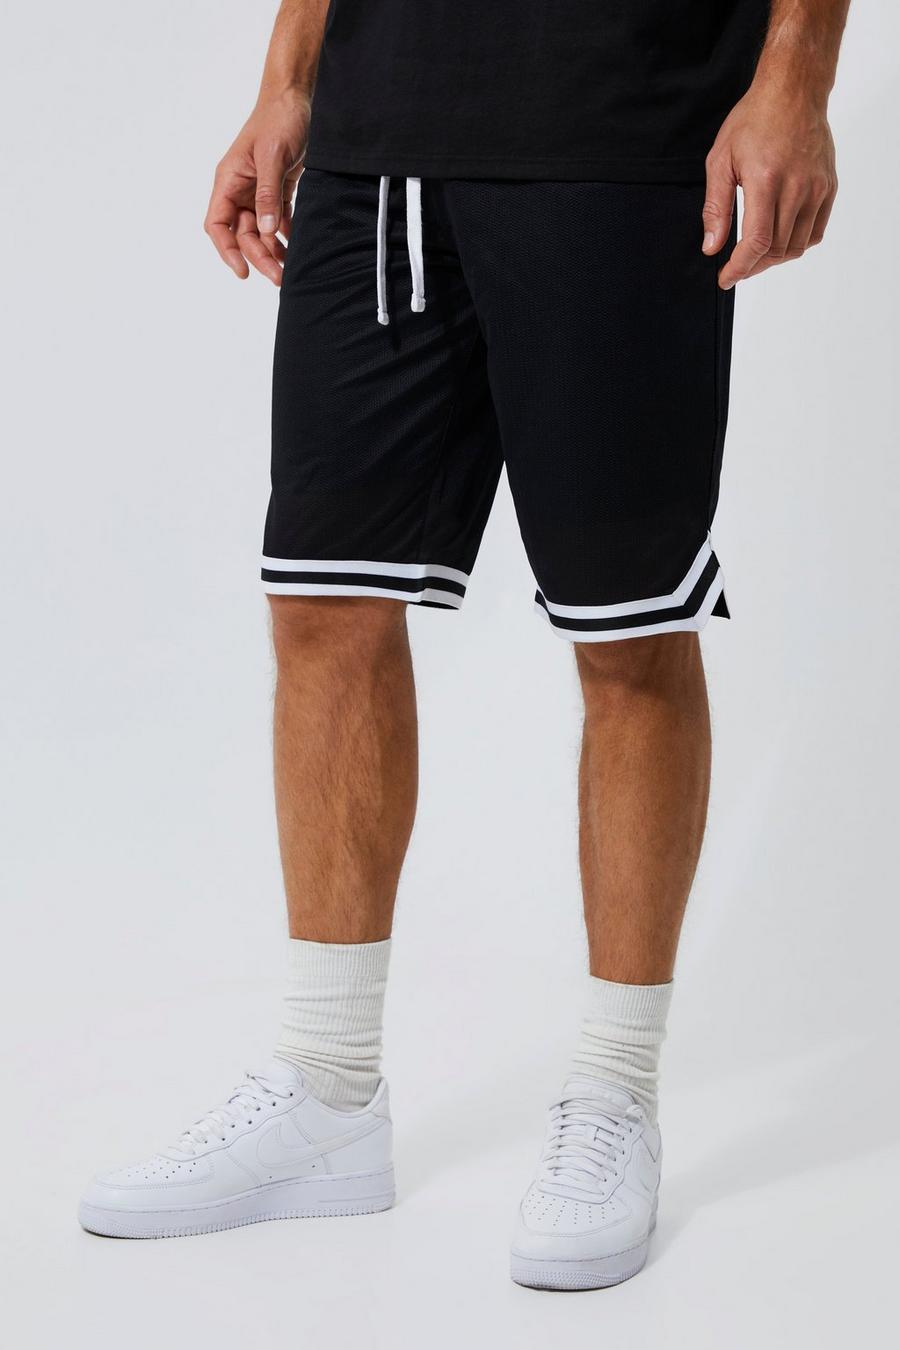 Black Tall Mesh Basketball Shorts With Tape image number 1